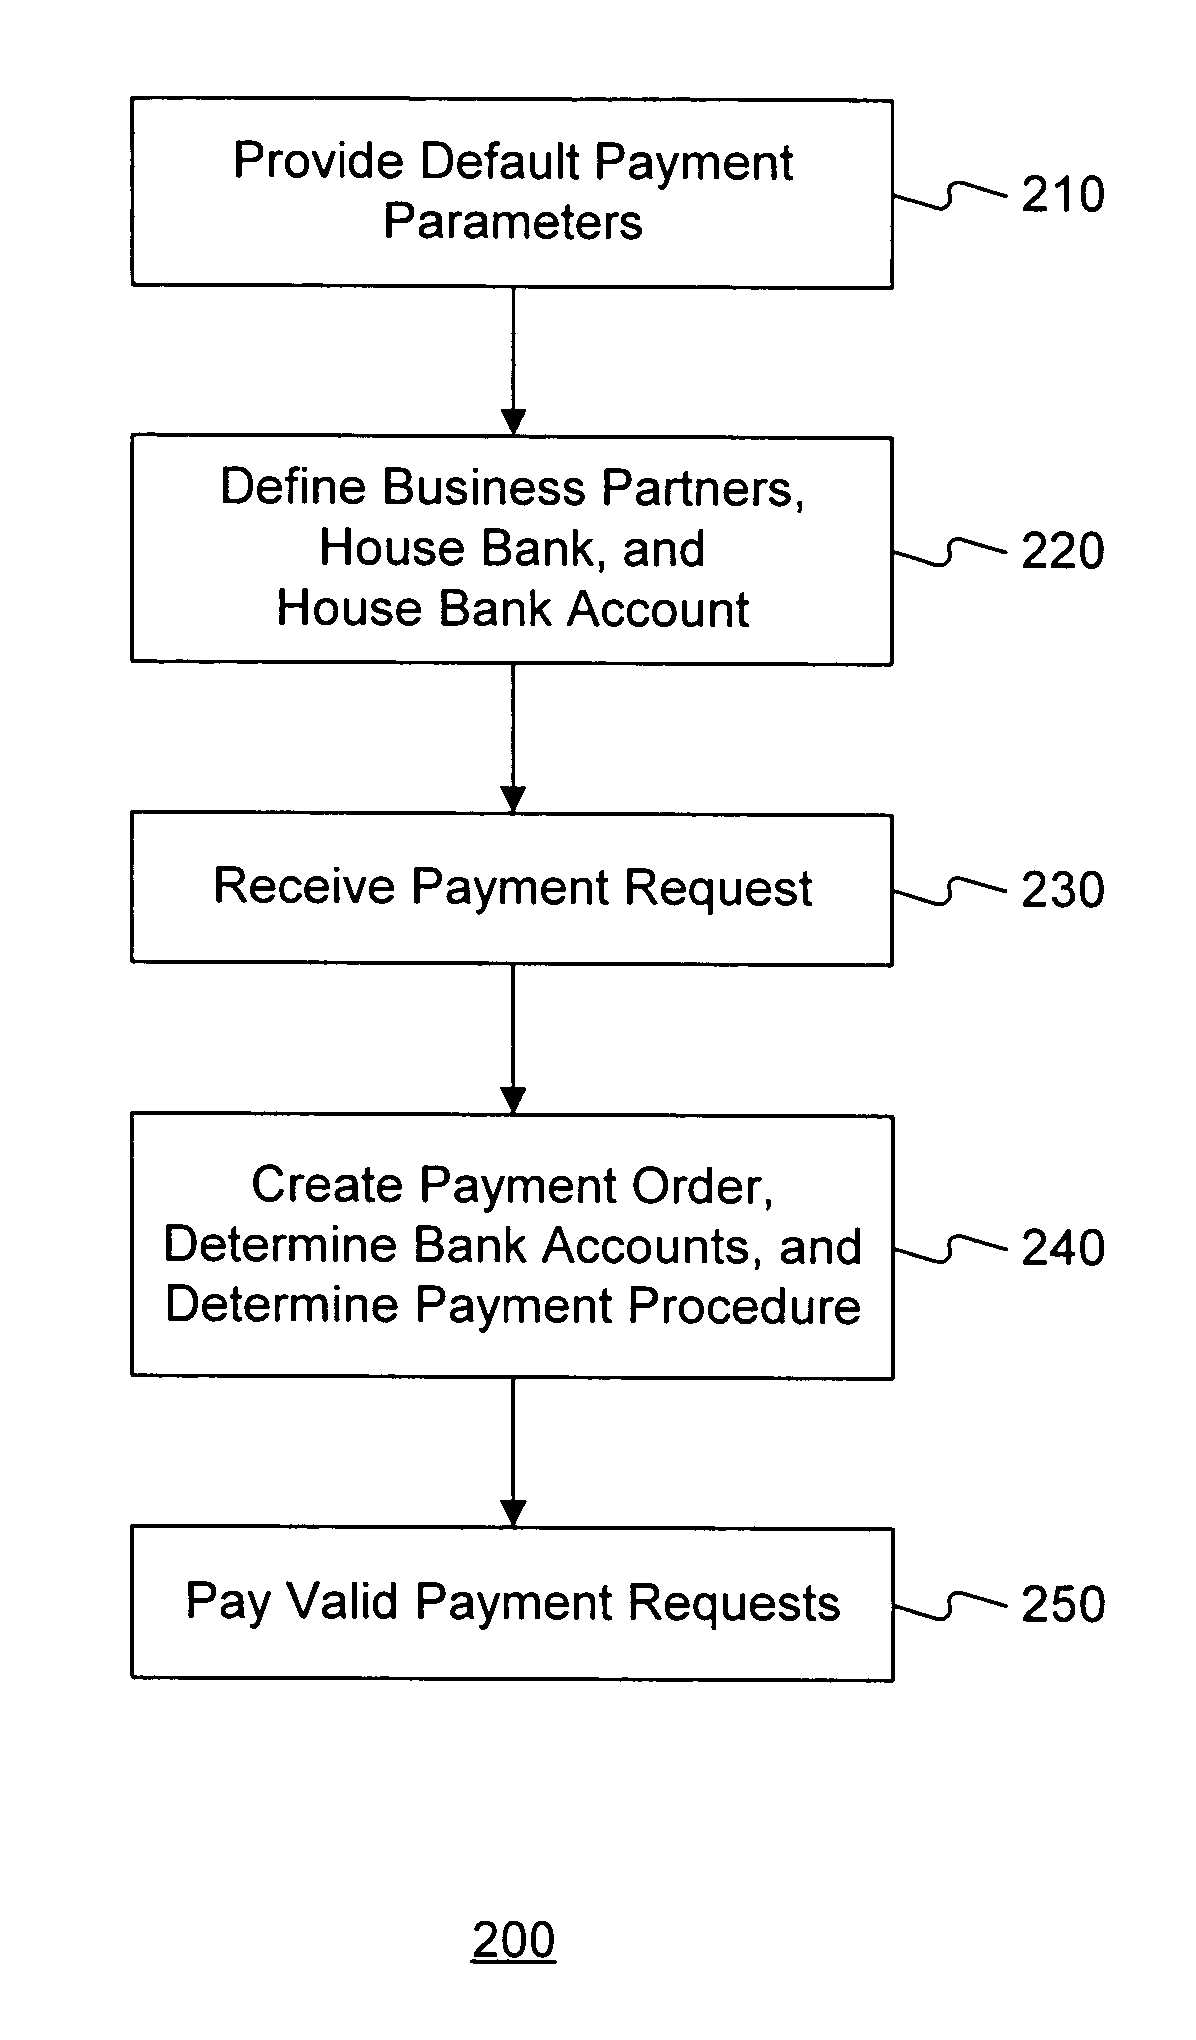 Systems and methods for bank determination and payment handling